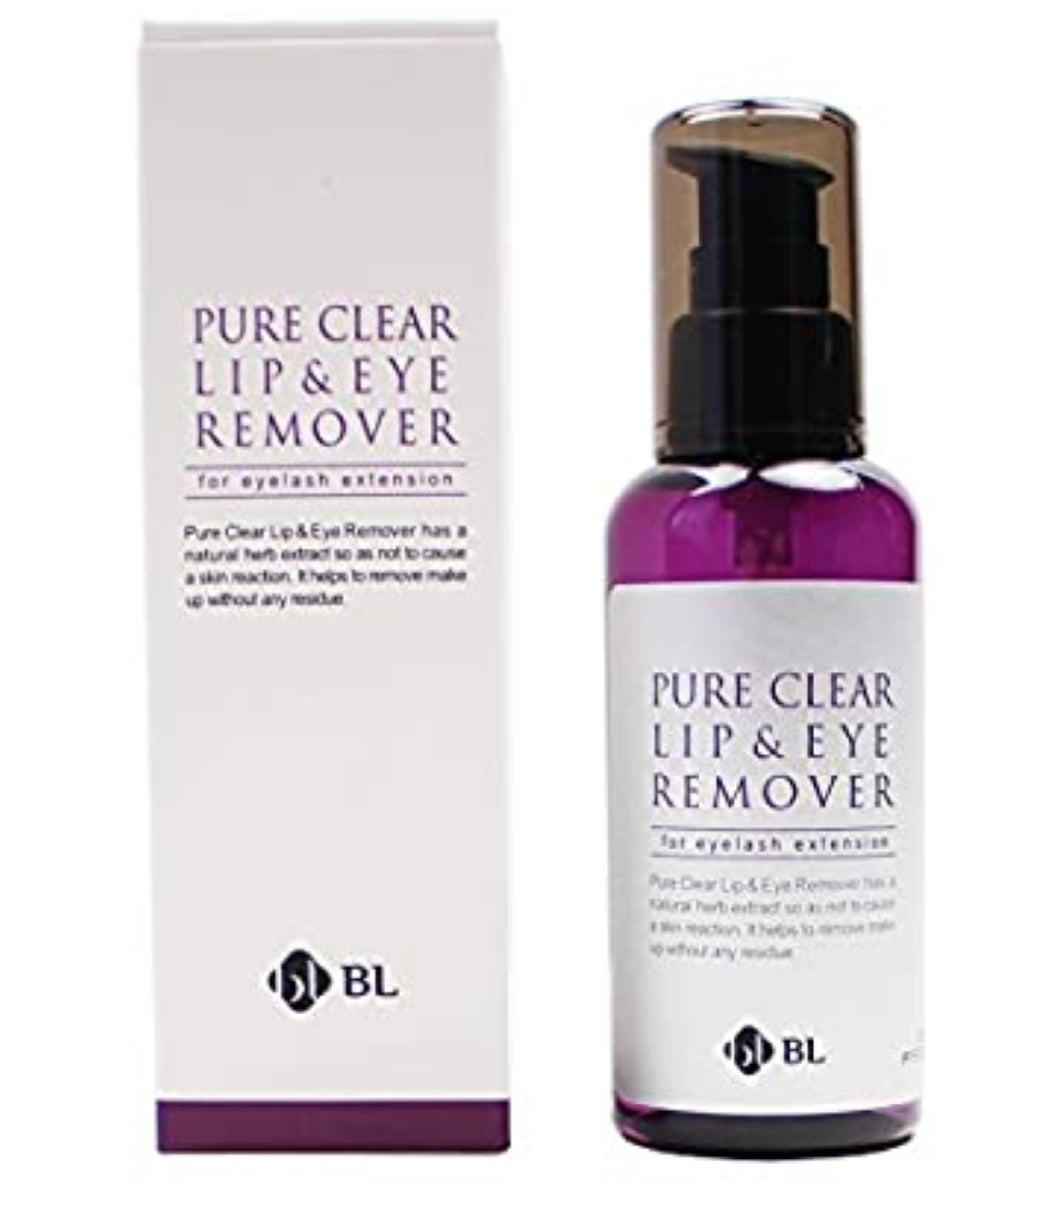 OIL FREE EYE CARE MAKE-UP REMOVER